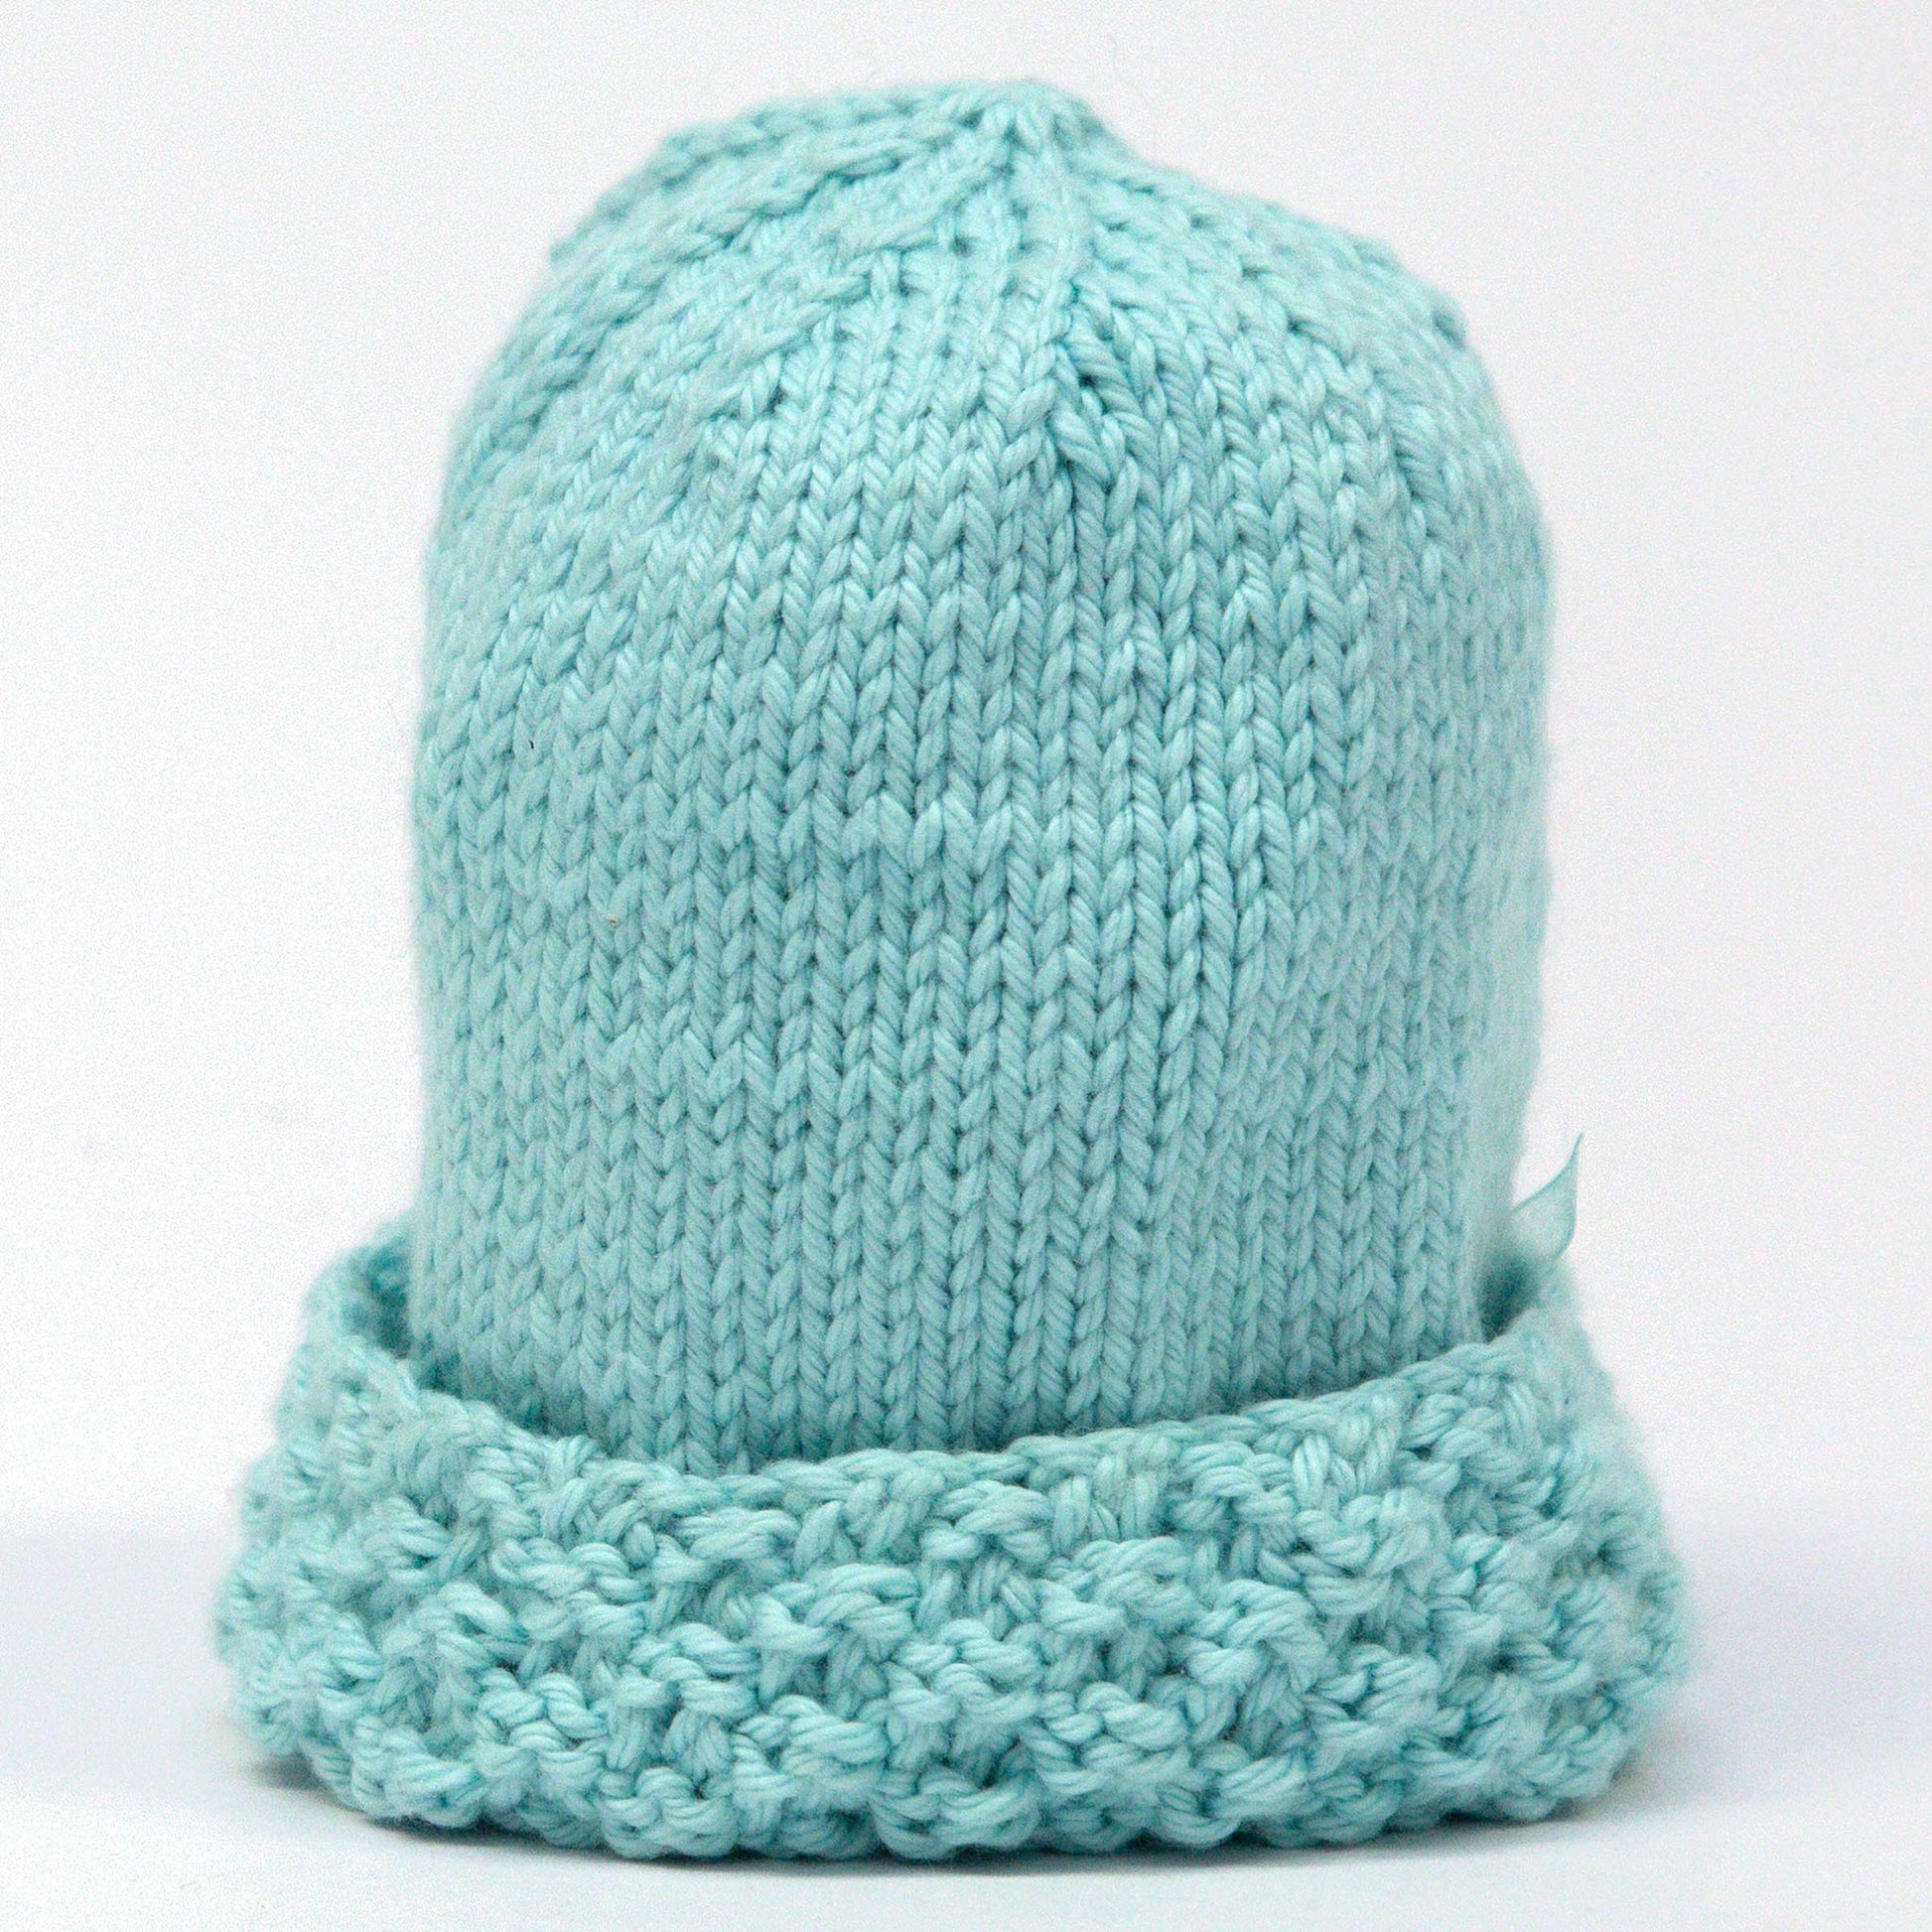 Knitted Baby Hat, Hand Knit, 100% Cotton, Washable, Lt. Baby Blue